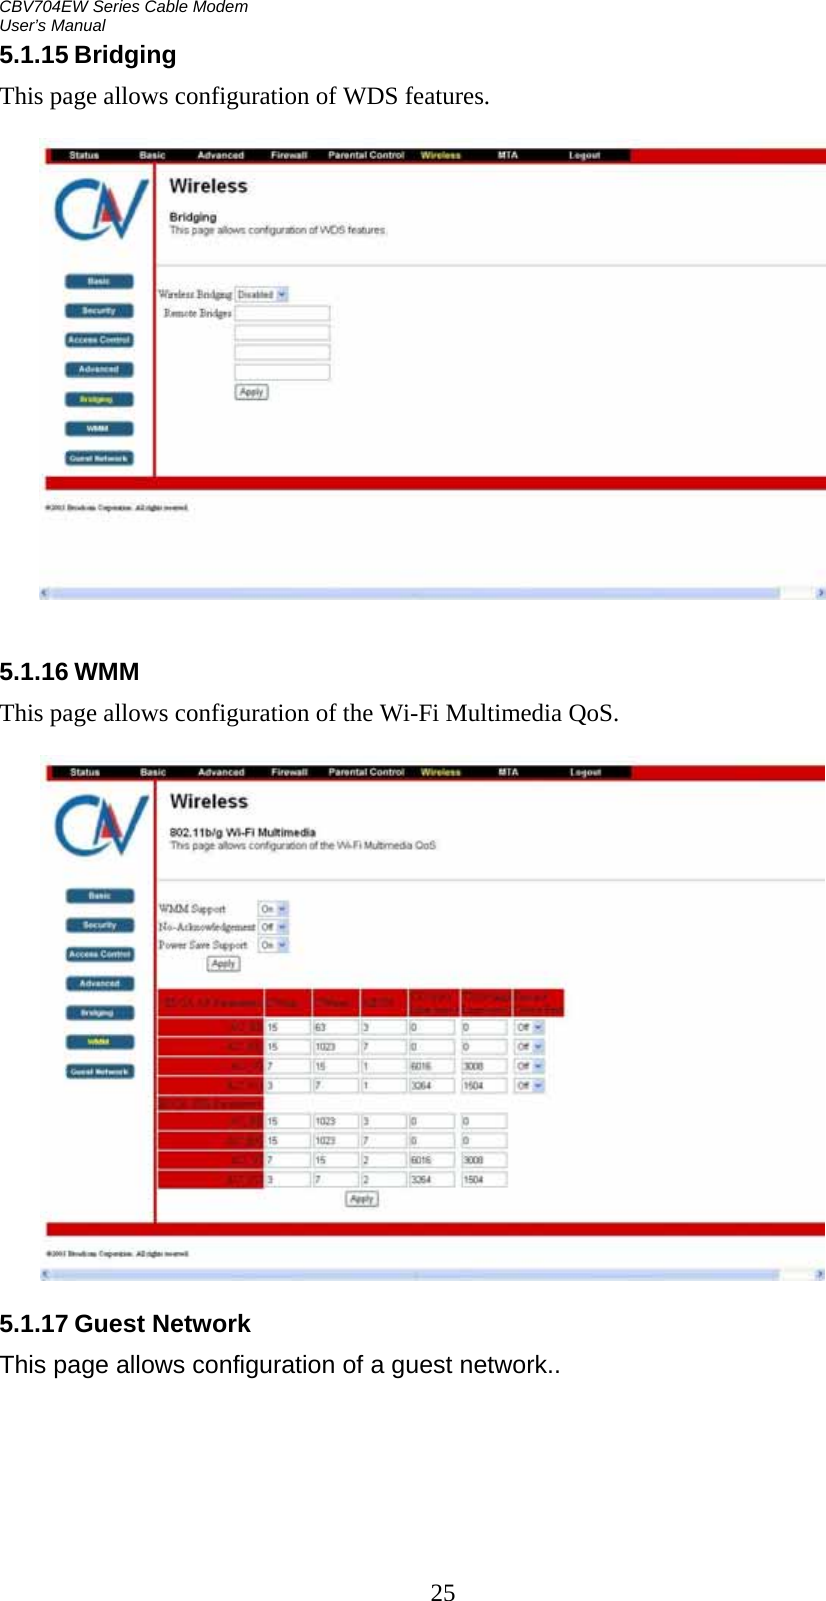 CBV704EW Series Cable Modem  User’s Manual   255.1.15 Bridging This page allows configuration of WDS features.     5.1.16 WMM This page allows configuration of the Wi-Fi Multimedia QoS.     5.1.17 Guest Network This page allows configuration of a guest network.. 